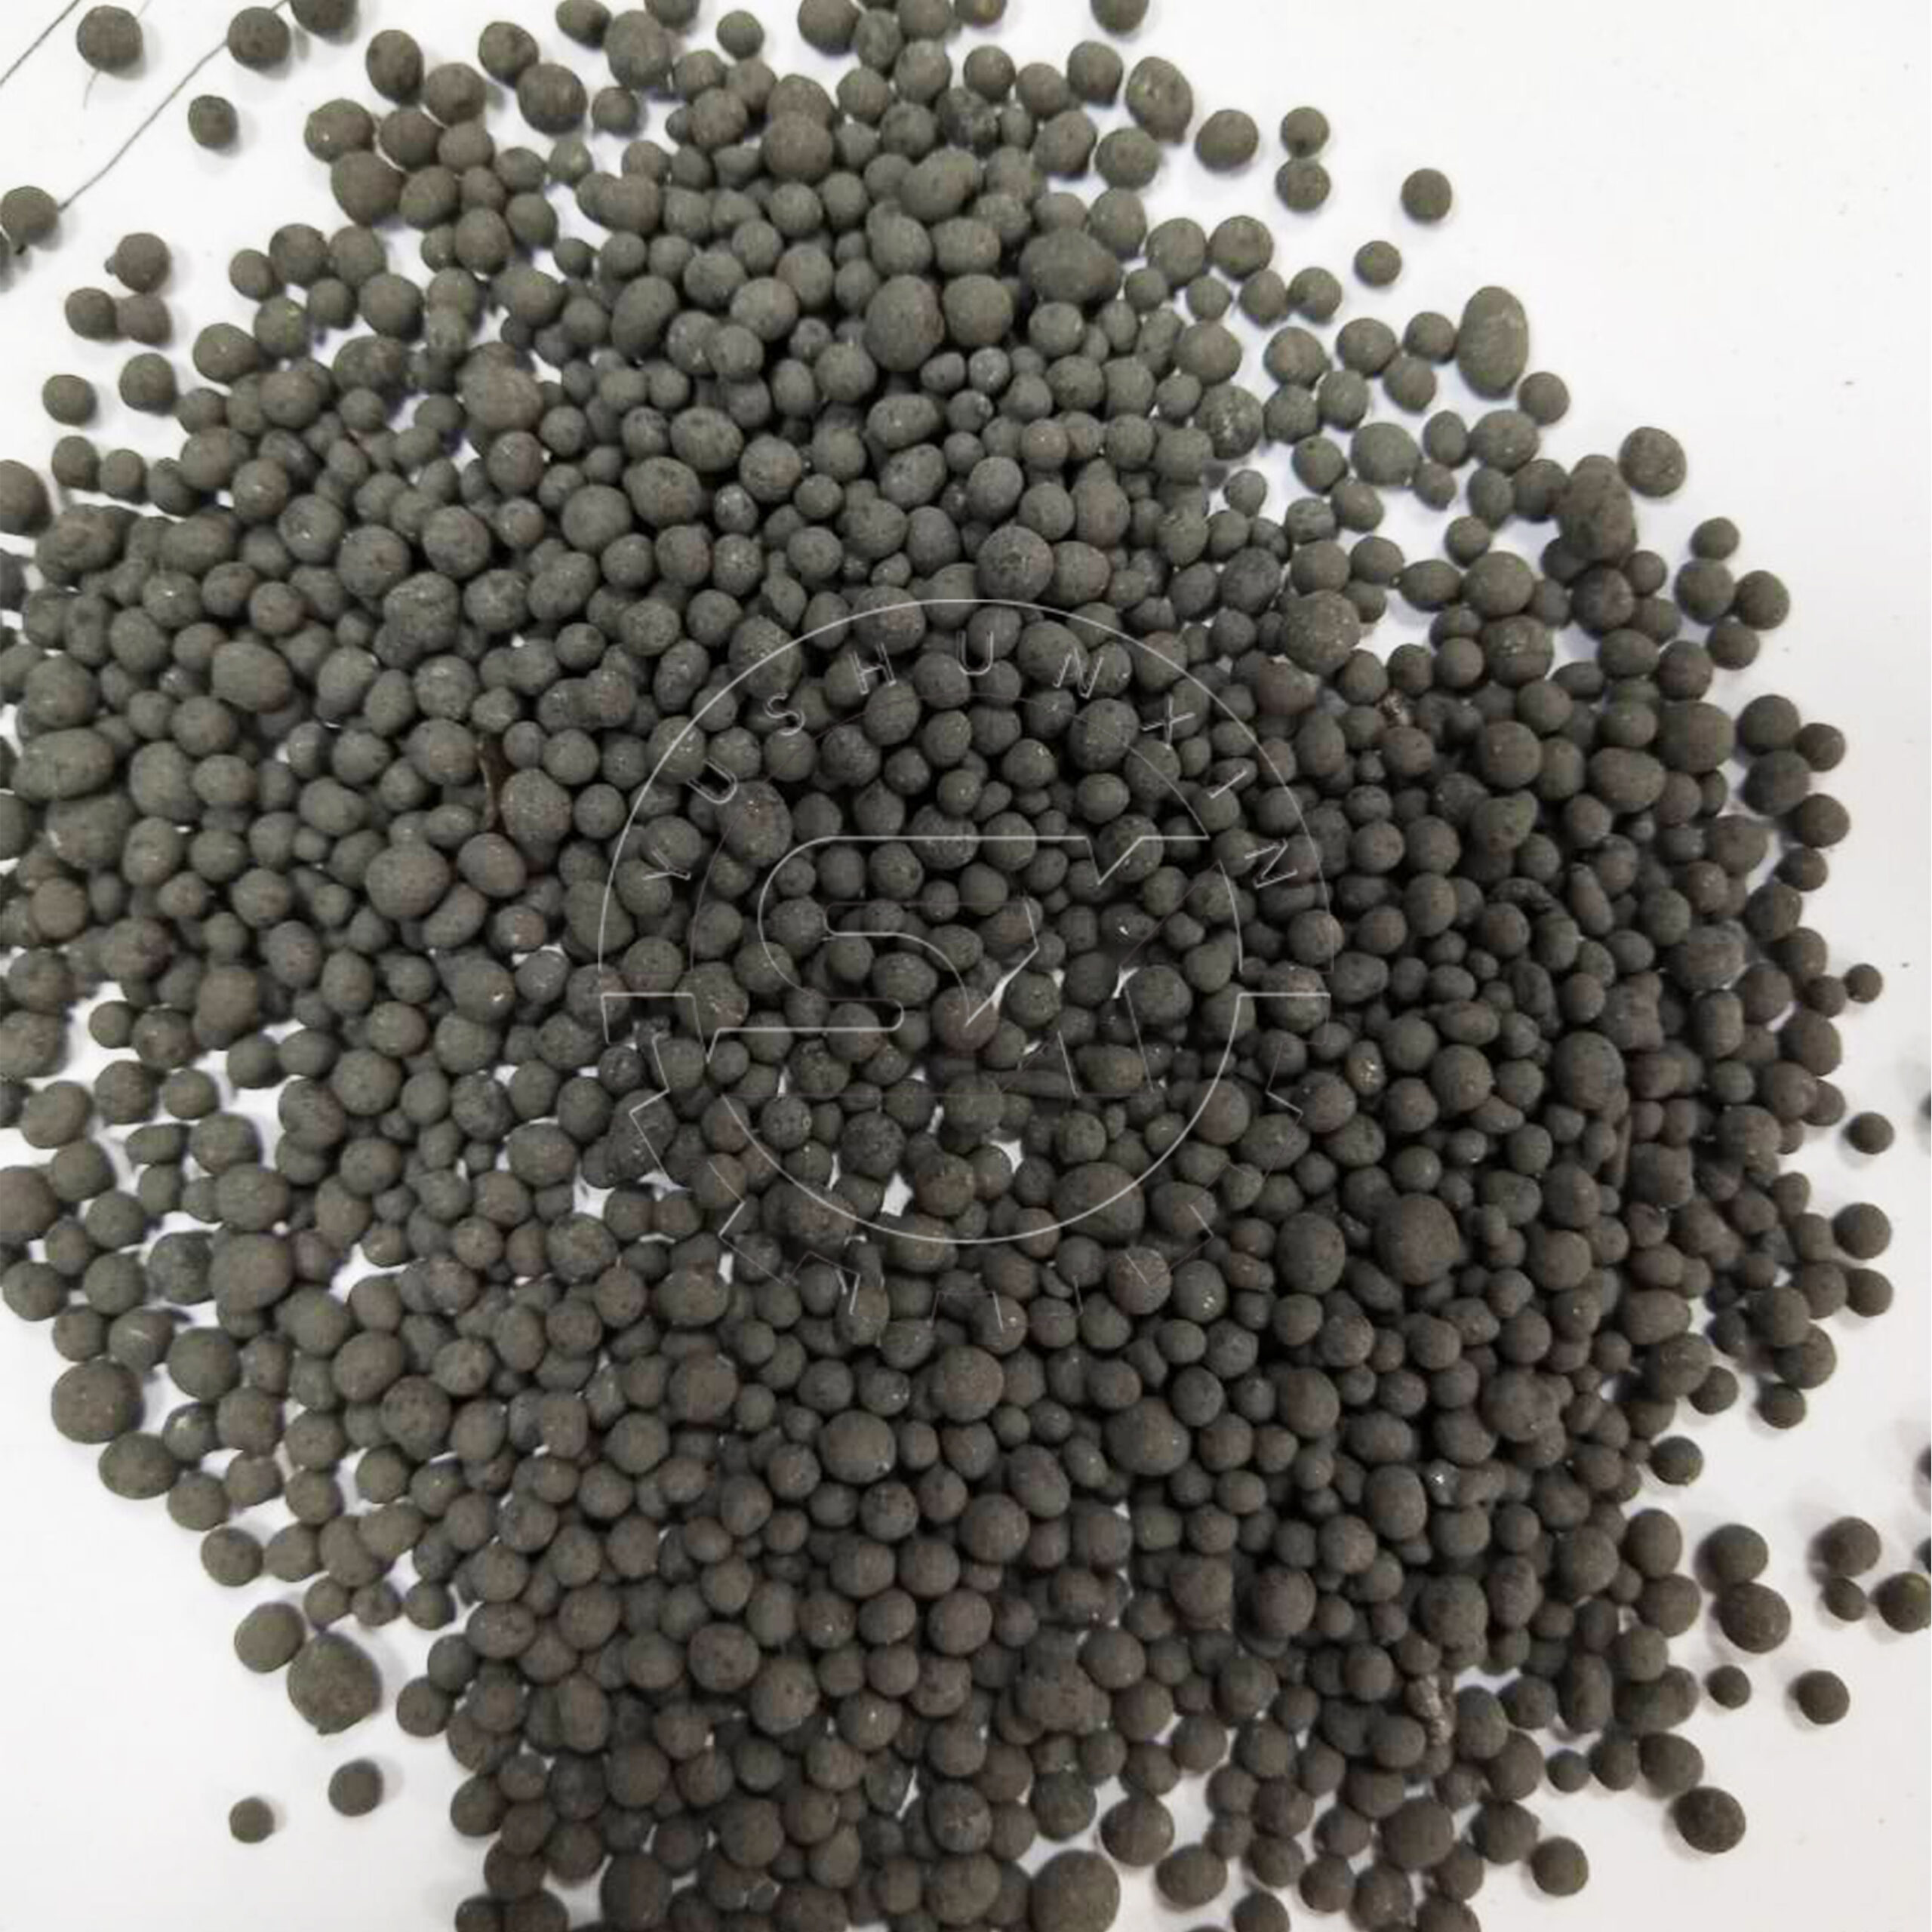 Organic Fertilizer Granules Processed by Rotary Drying Machine